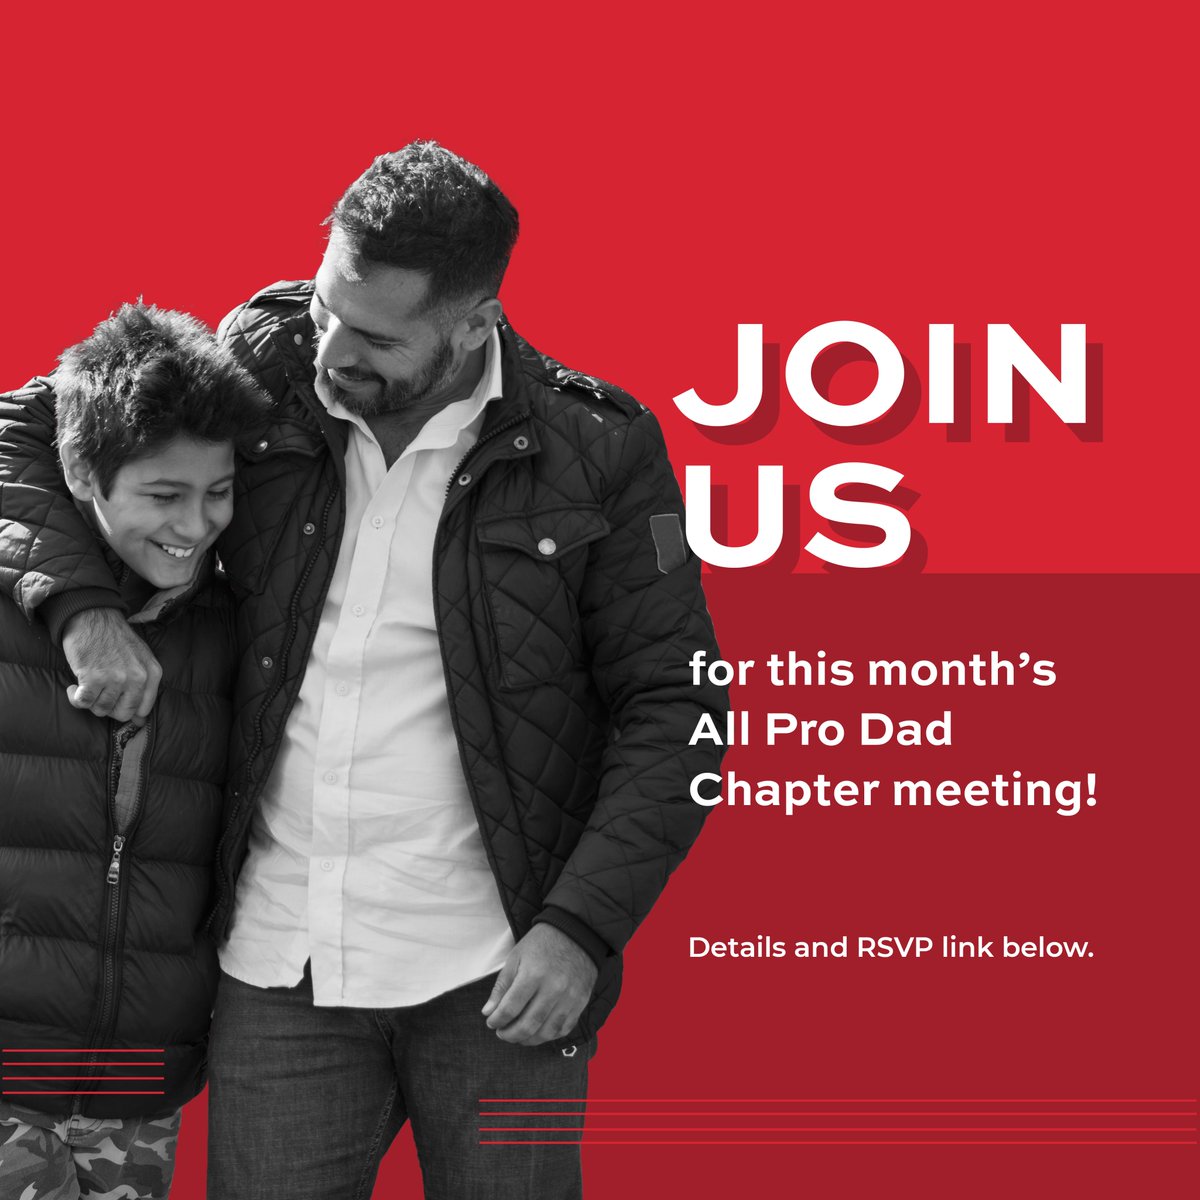 All dads and caring adults are invited to bring their students for an All Pro Dads meeting in the McKendree Elementary School Cafeteria on Friday, October 27, from 6:45 a.m. to 7:20 a.m.